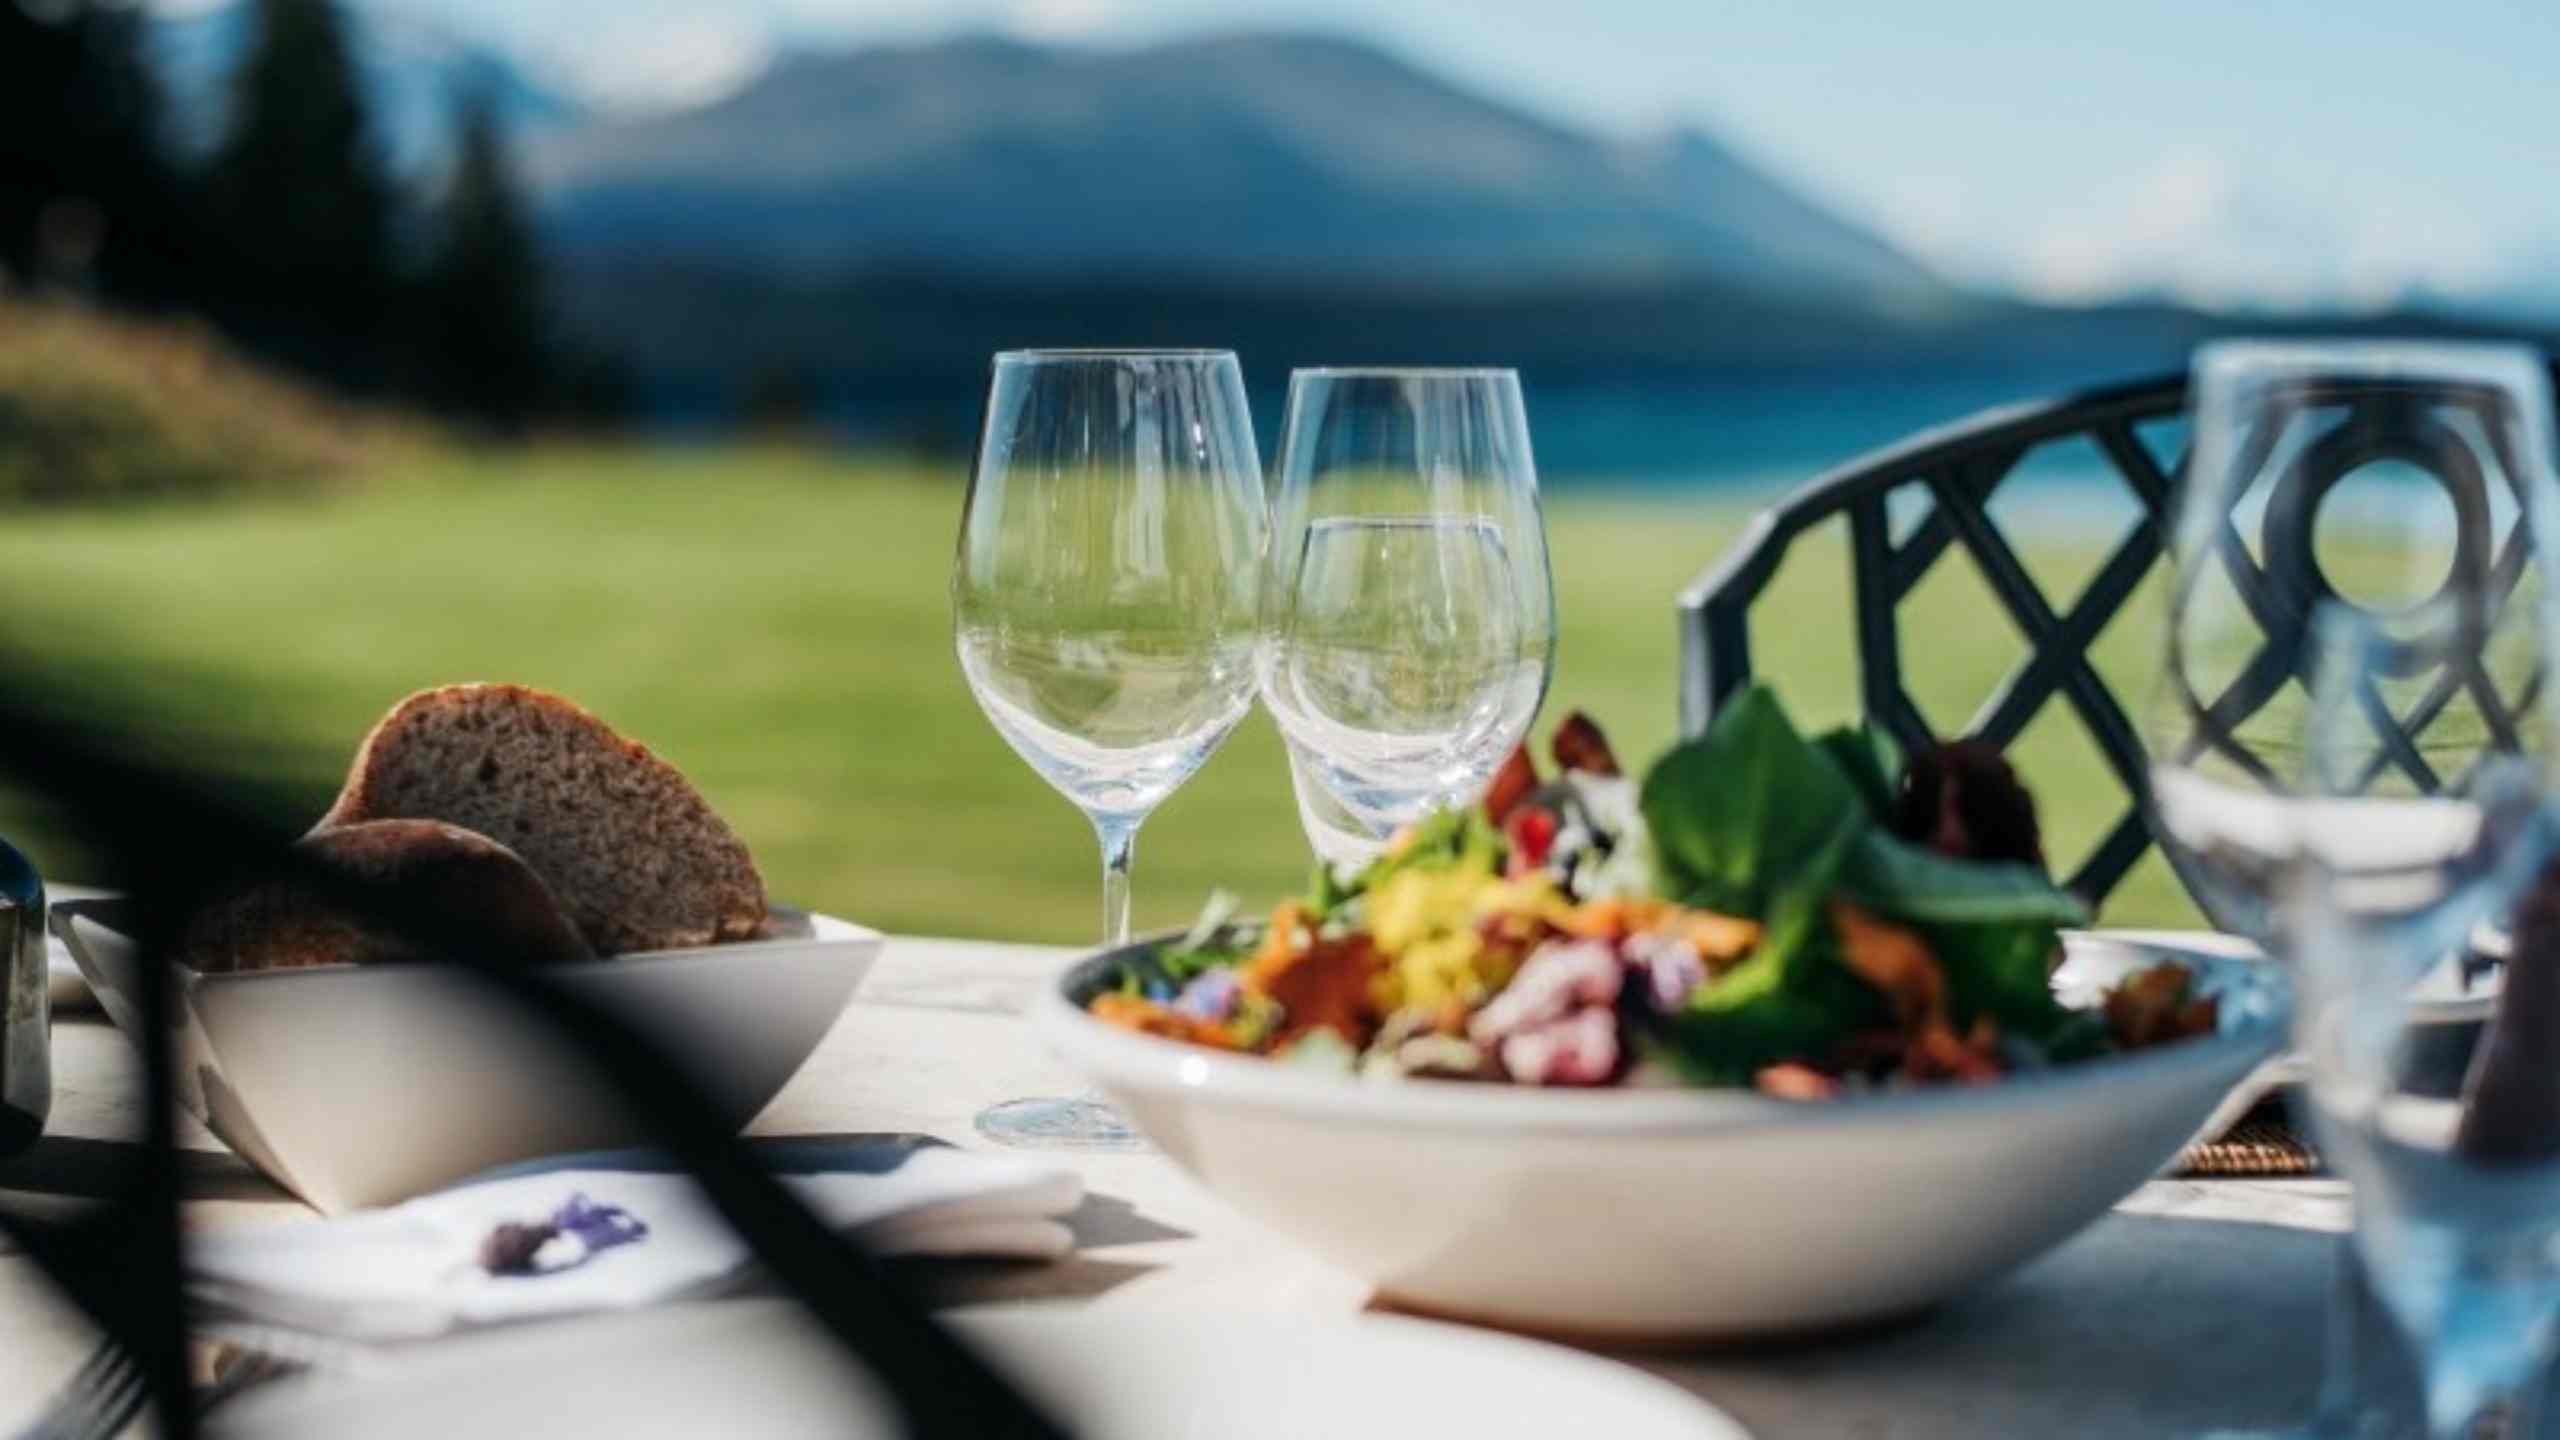 mt-cook-lakeside-retreat-new-zealand-cuisine-dining